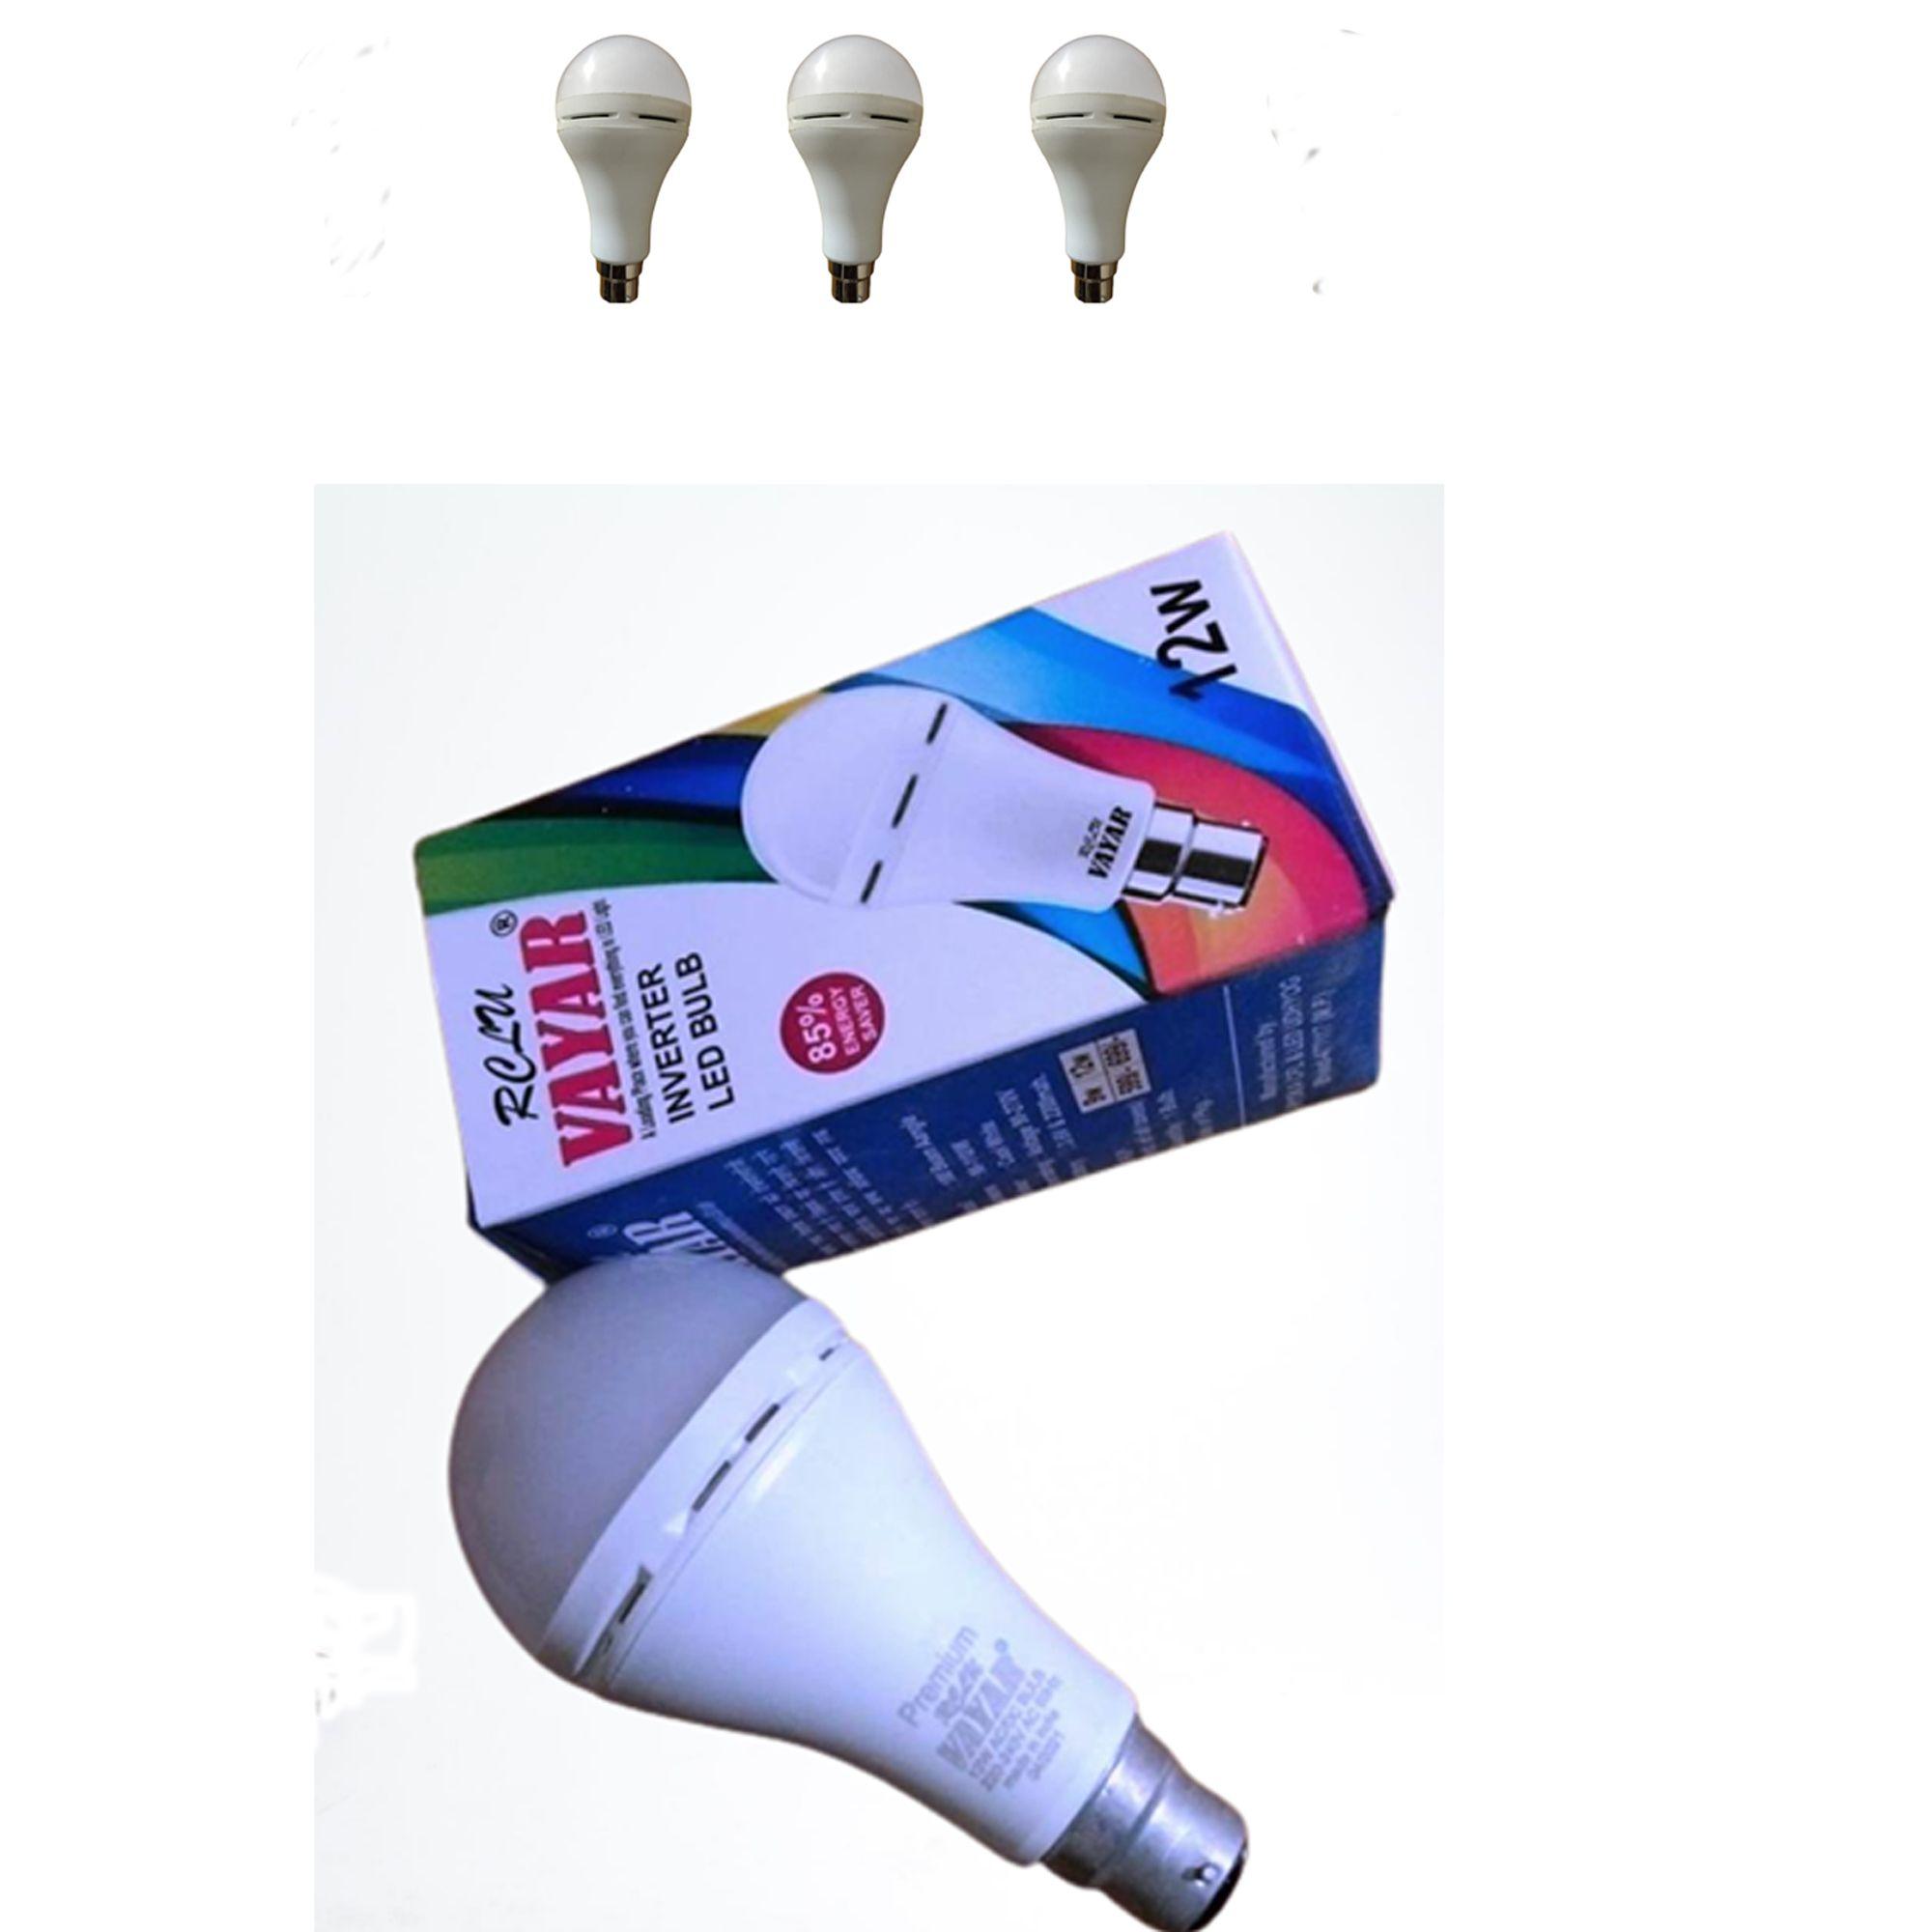 RECHARGEABLE BULB 12W